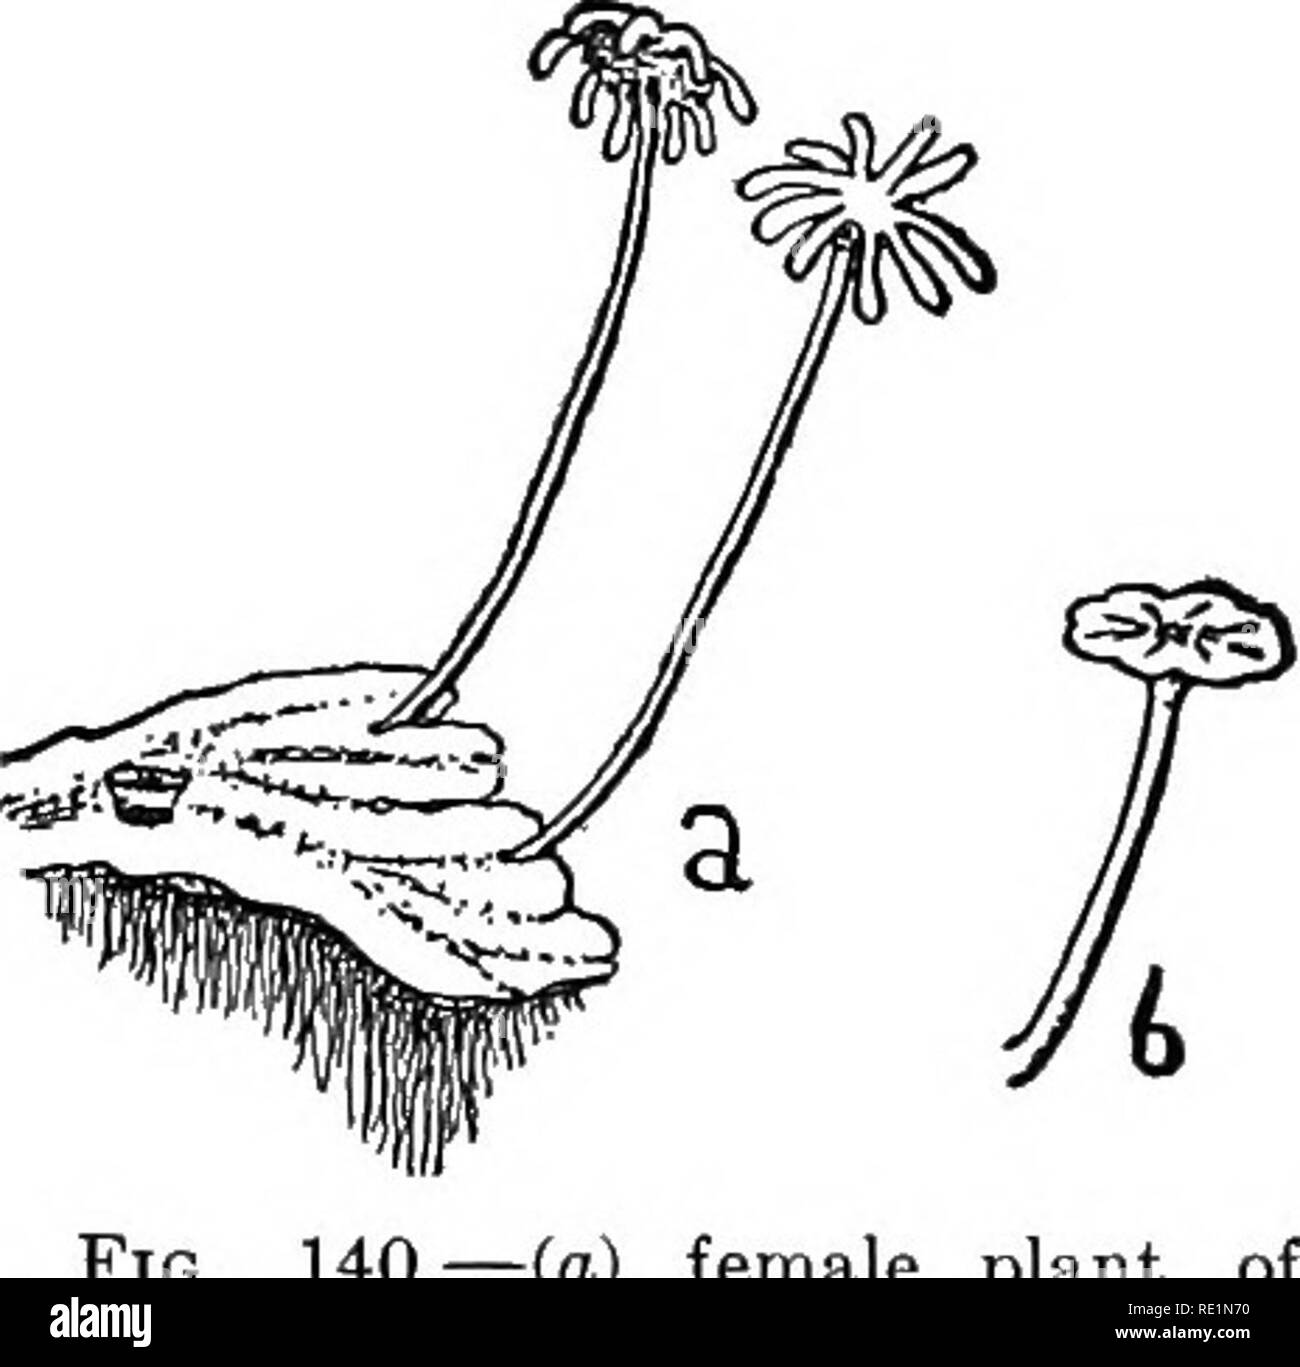 . College botany; structure, physiology and economics of plants. Botany. 292 COLLEGE BOTANY and produce new gametophytes. Tke complete life history is illustrated in Fig. 141. The genus Biccia also belongs to the Marchantiales and con- tains a number of species, some of which are terrestrial and others aquatic. They are smaller than M. polymorpha and the antheridia and archegonia remain embedded in cavities of the thallus. They are the simplest of the Hepaticoe. The Jungermanniales contains a larger number of species than either of the other two groups. They grow under conditions ranging from  Stock Photo